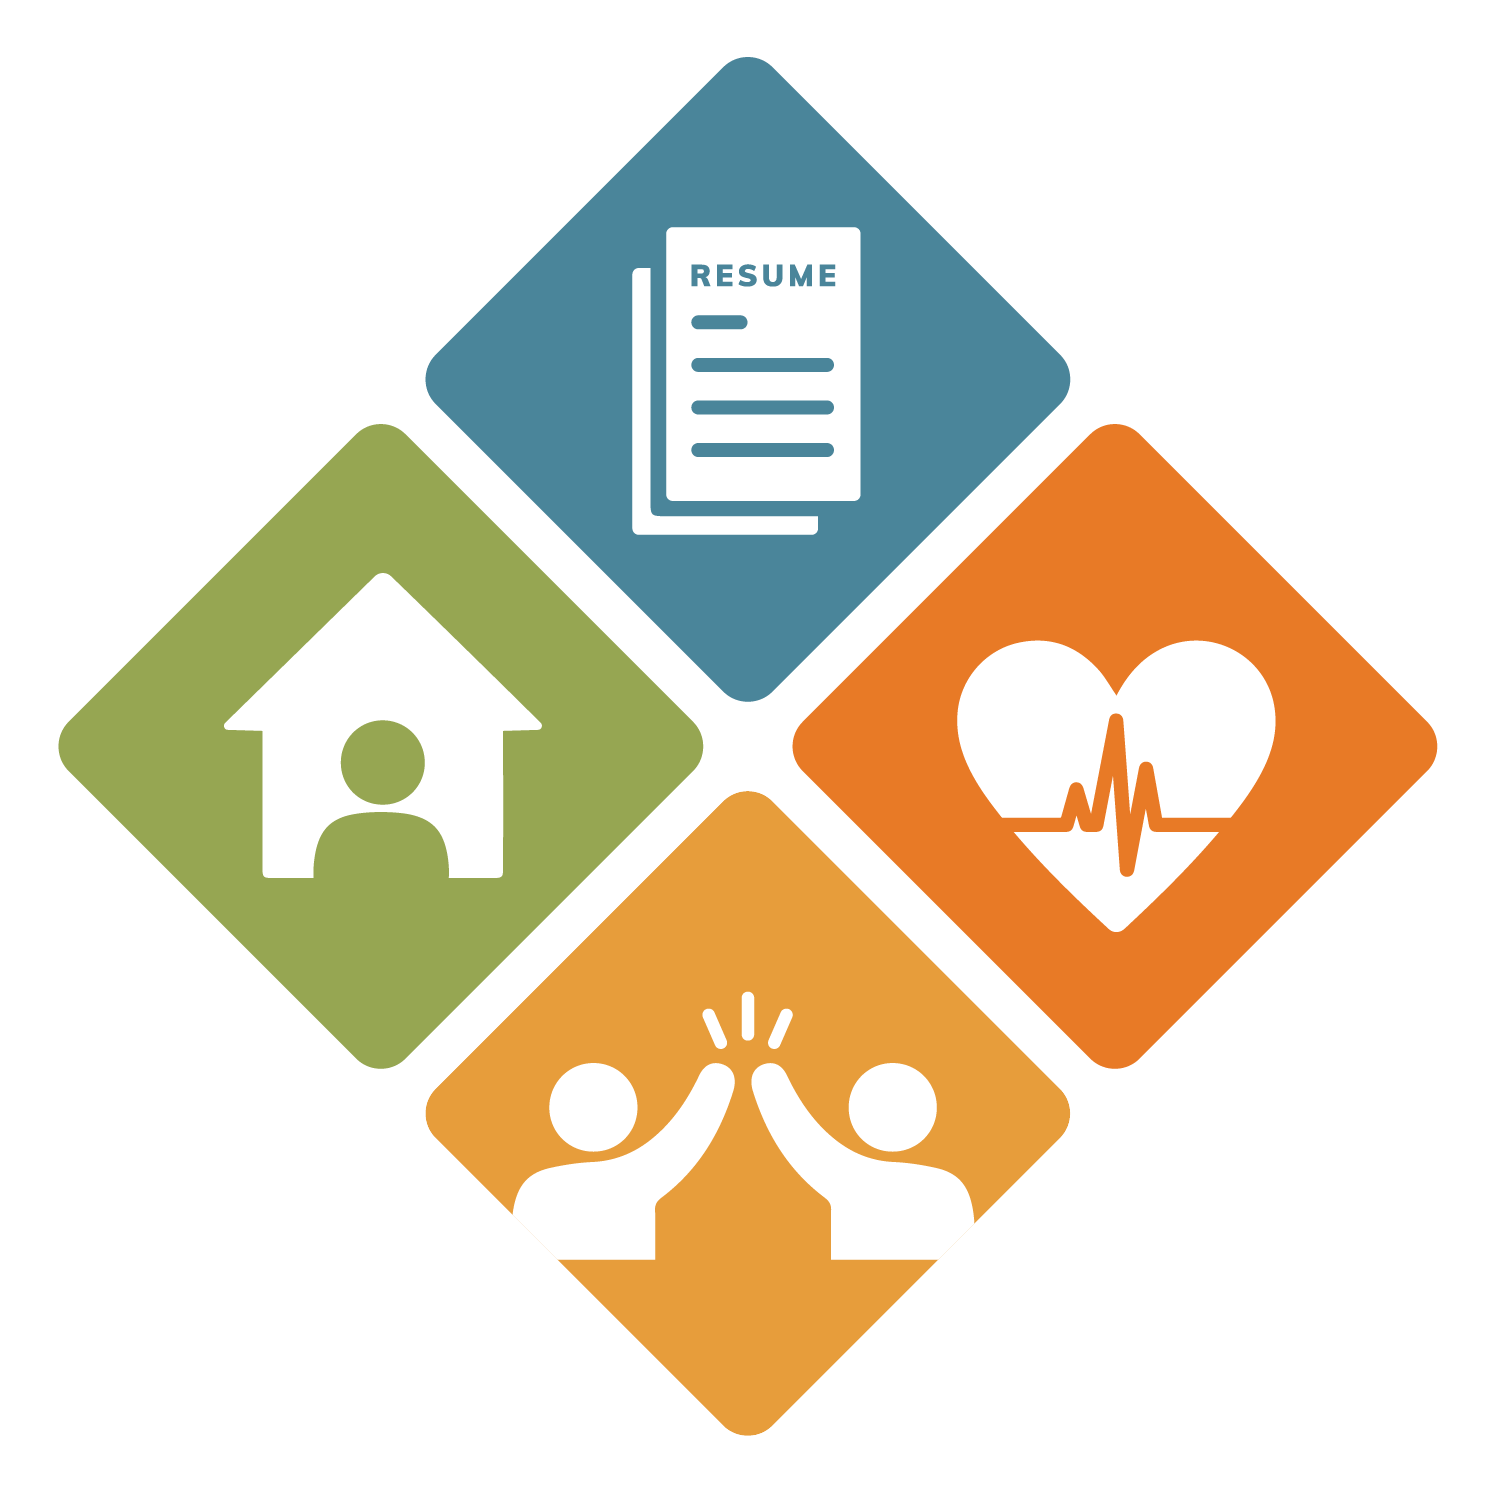 Icons showing some of the domains of self-sufficiency including housing, resume, health care, and community involvement.